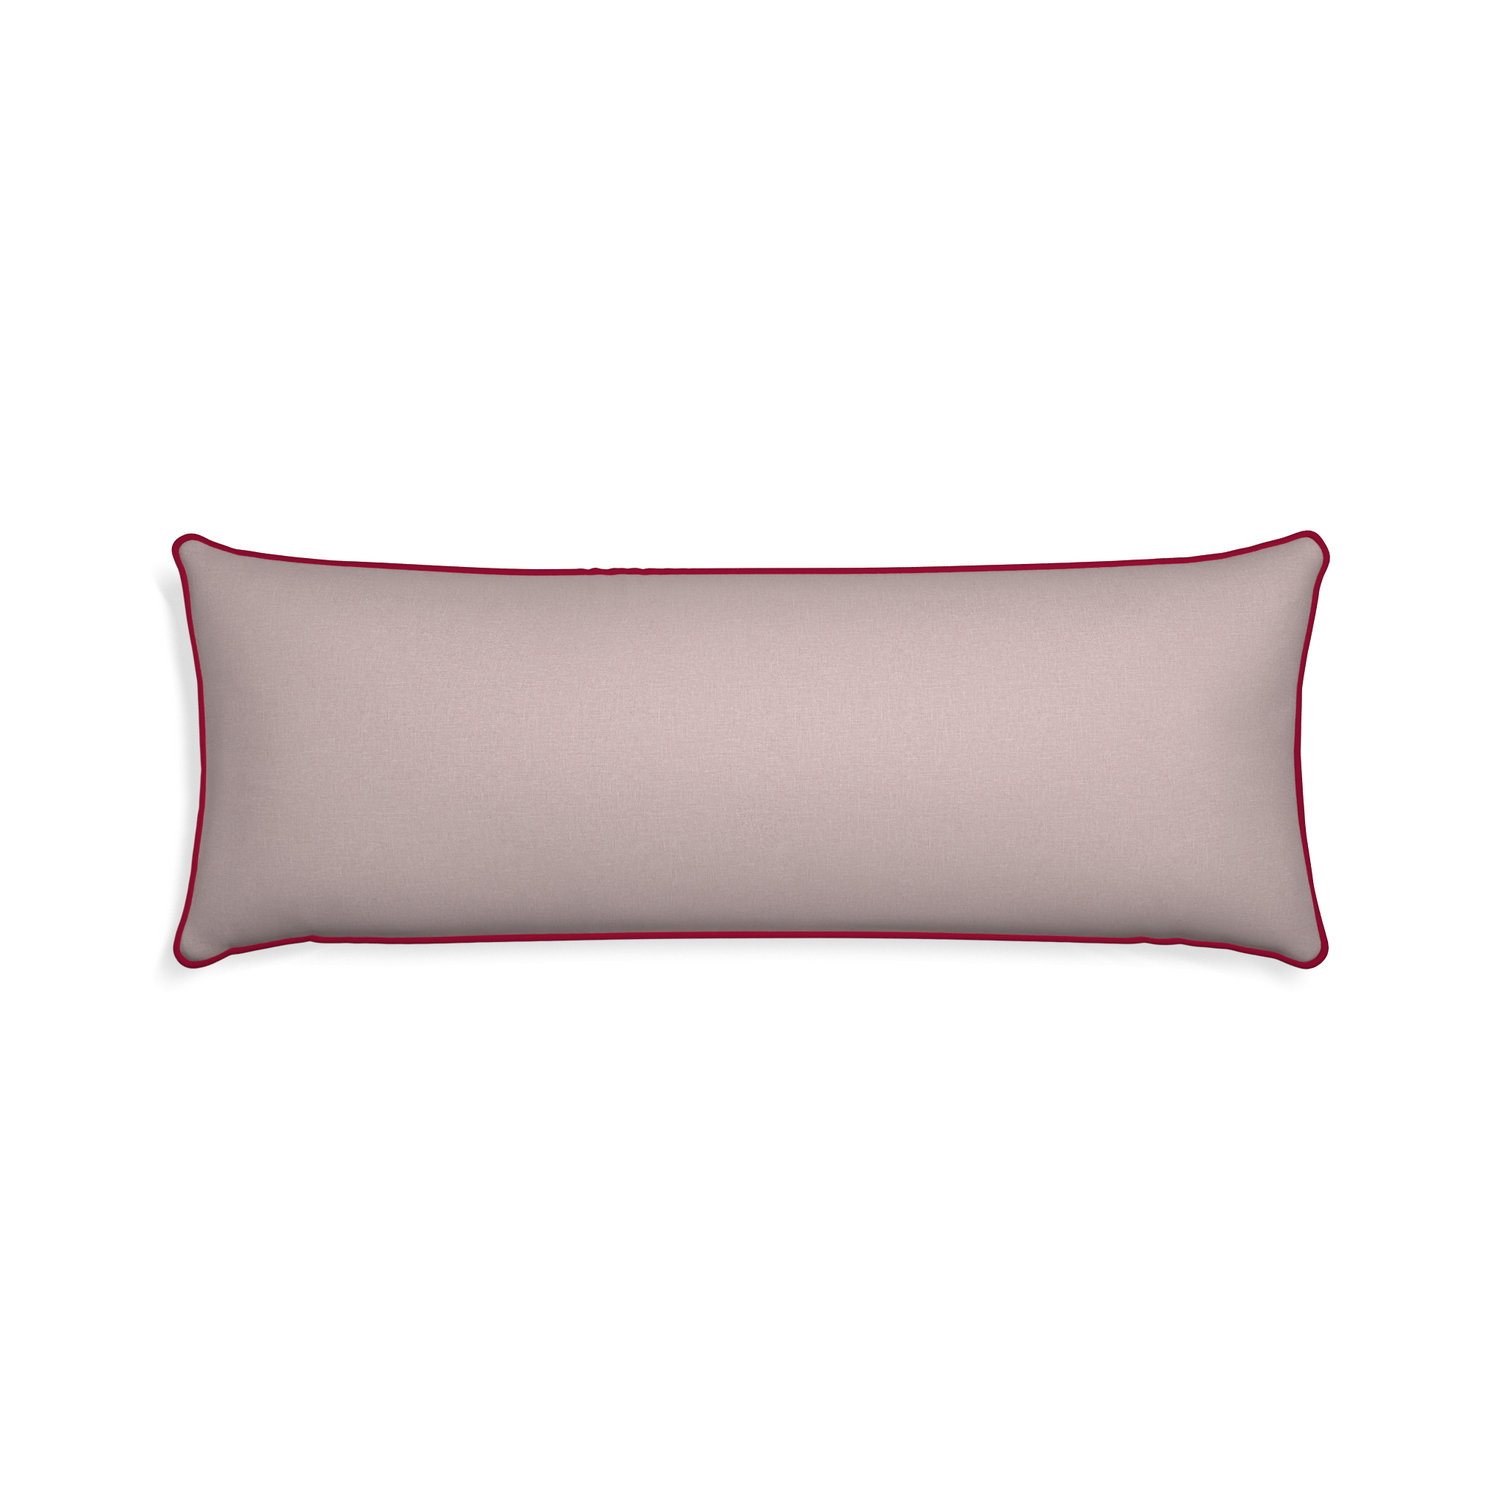 Xl-lumbar orchid custom mauve pinkpillow with raspberry piping on white background